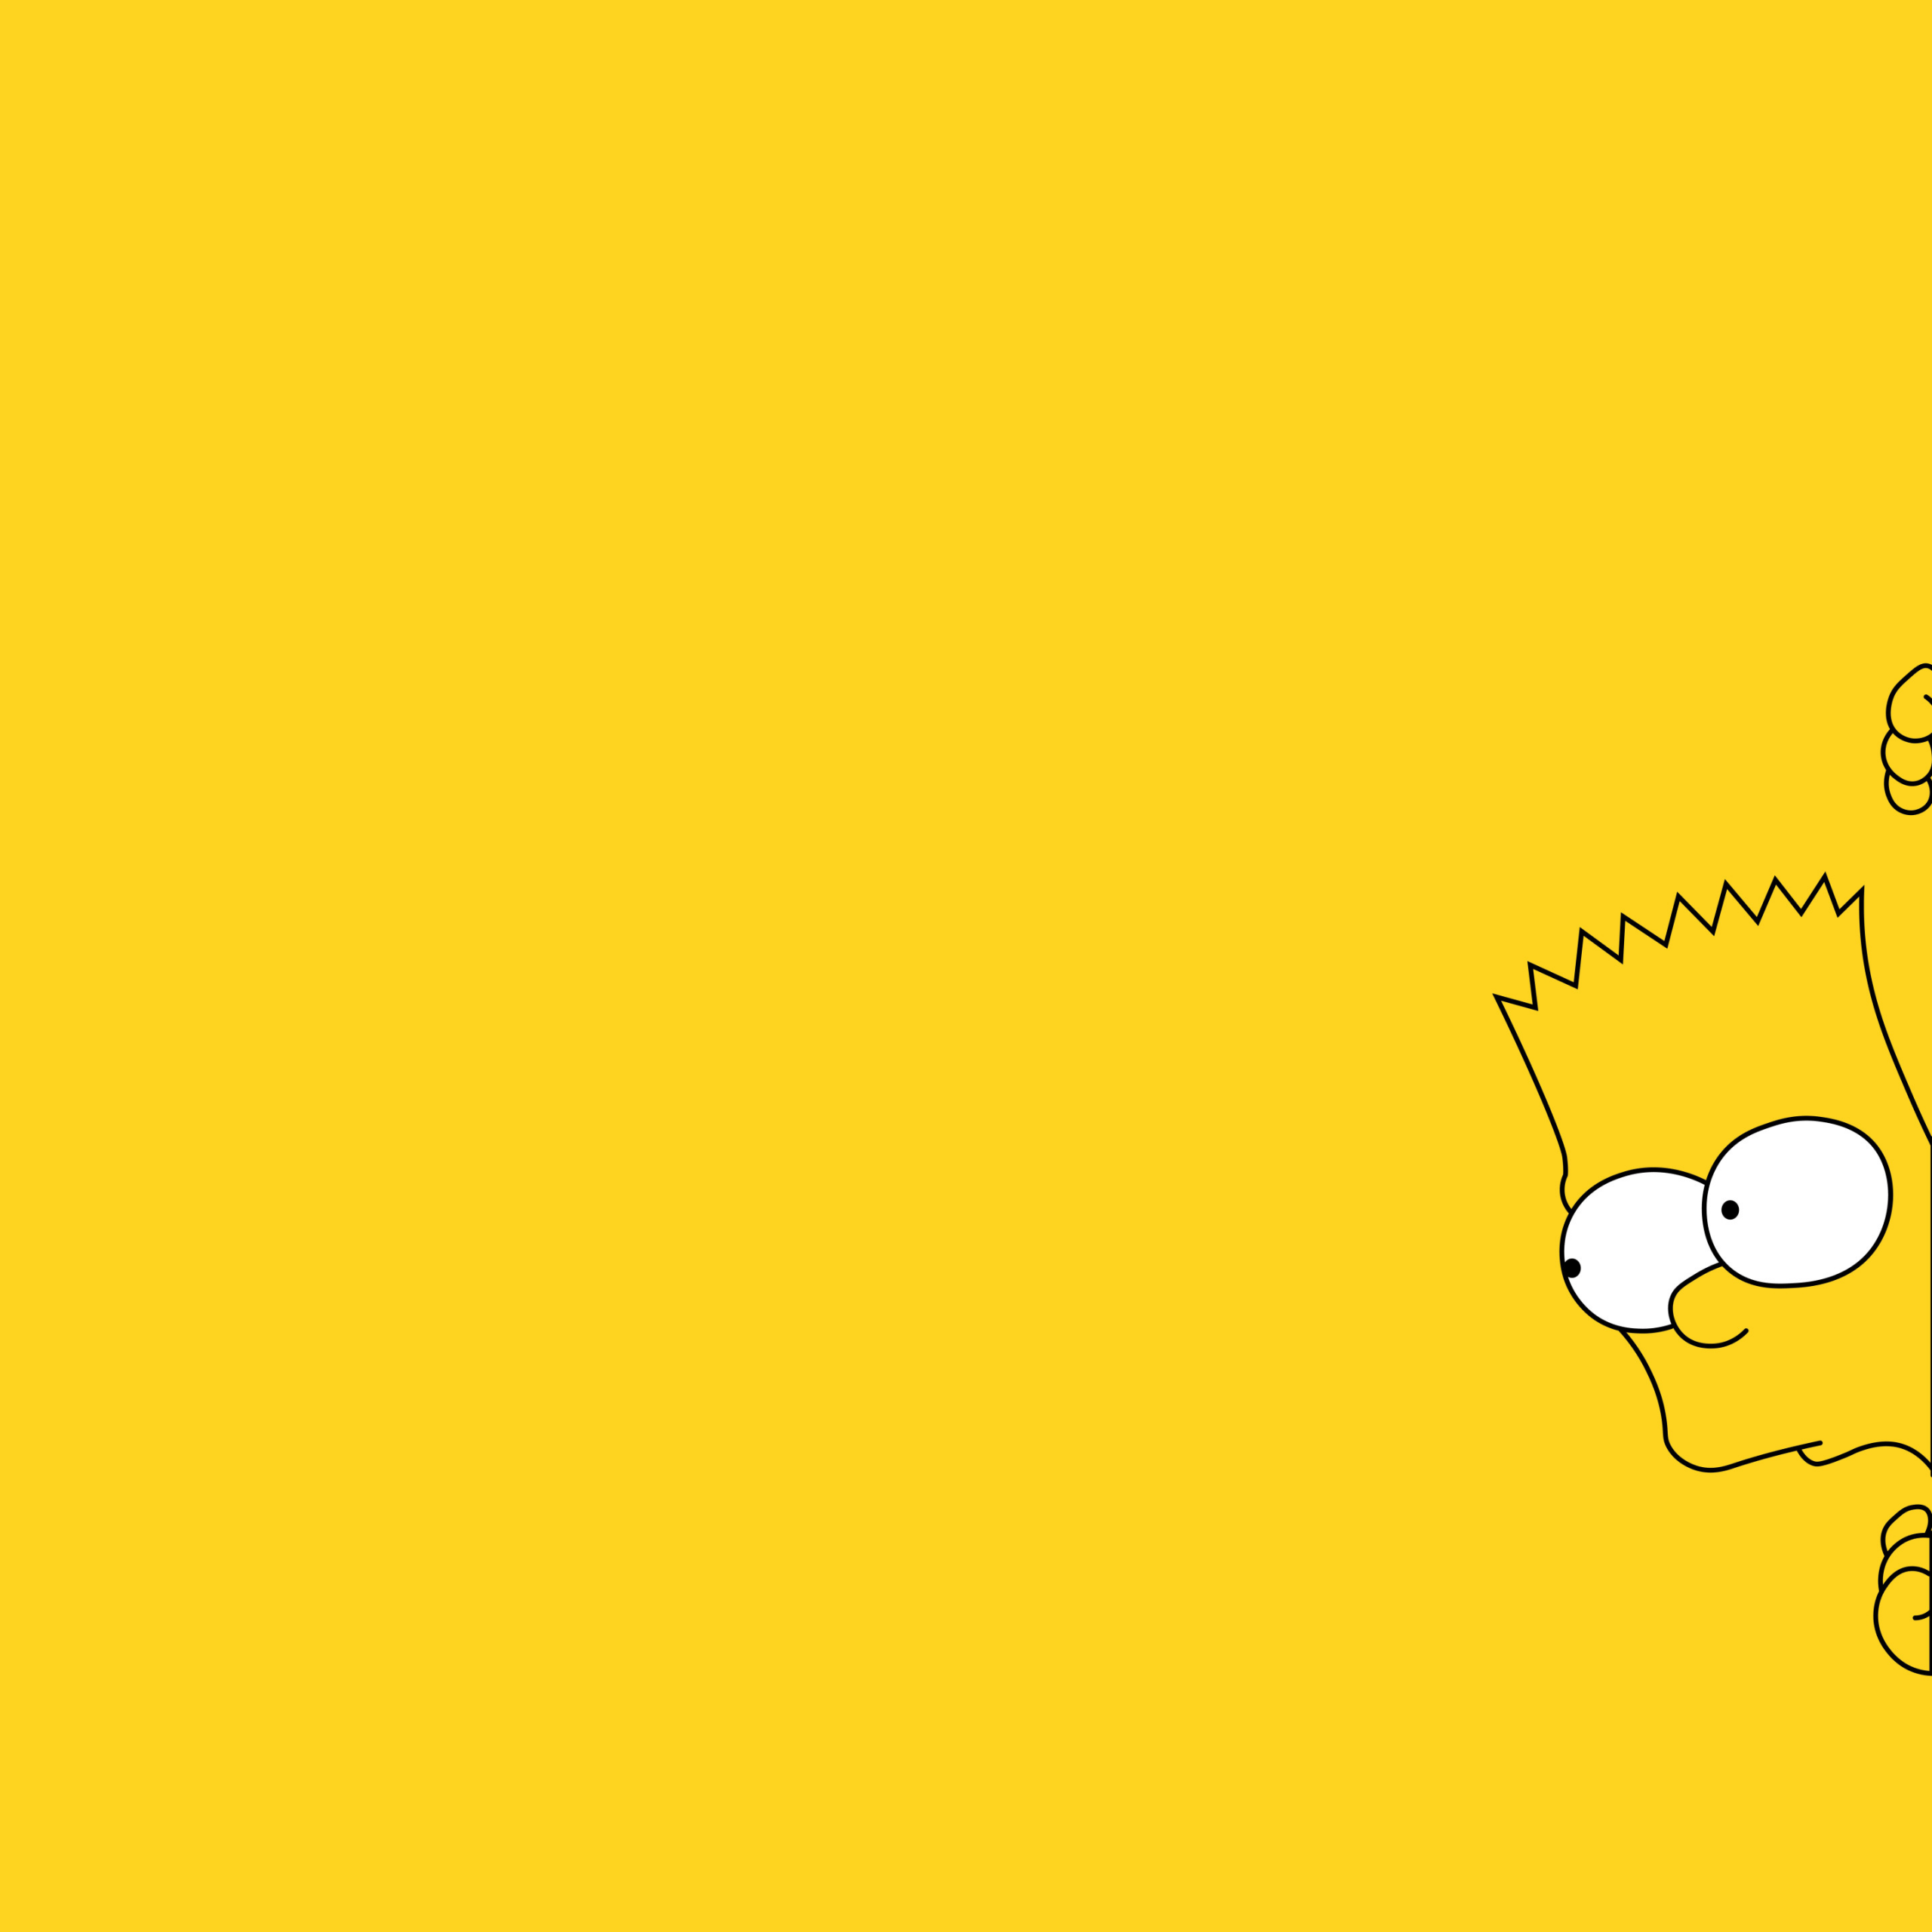 Bart Simpson on a yellow background - The Simpsons, Bart Simpson